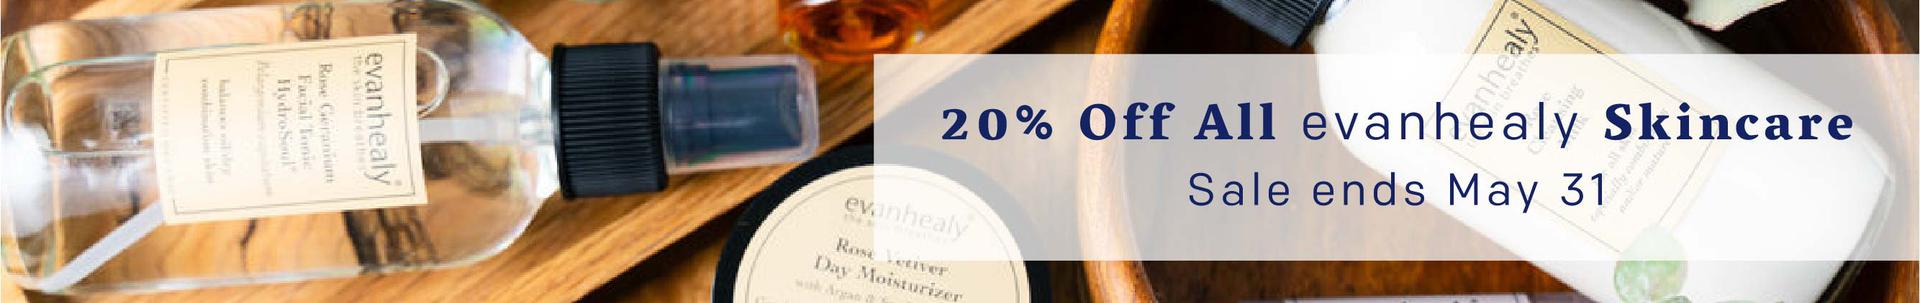 20% Off All evanhealy Skincare - Ends May 31